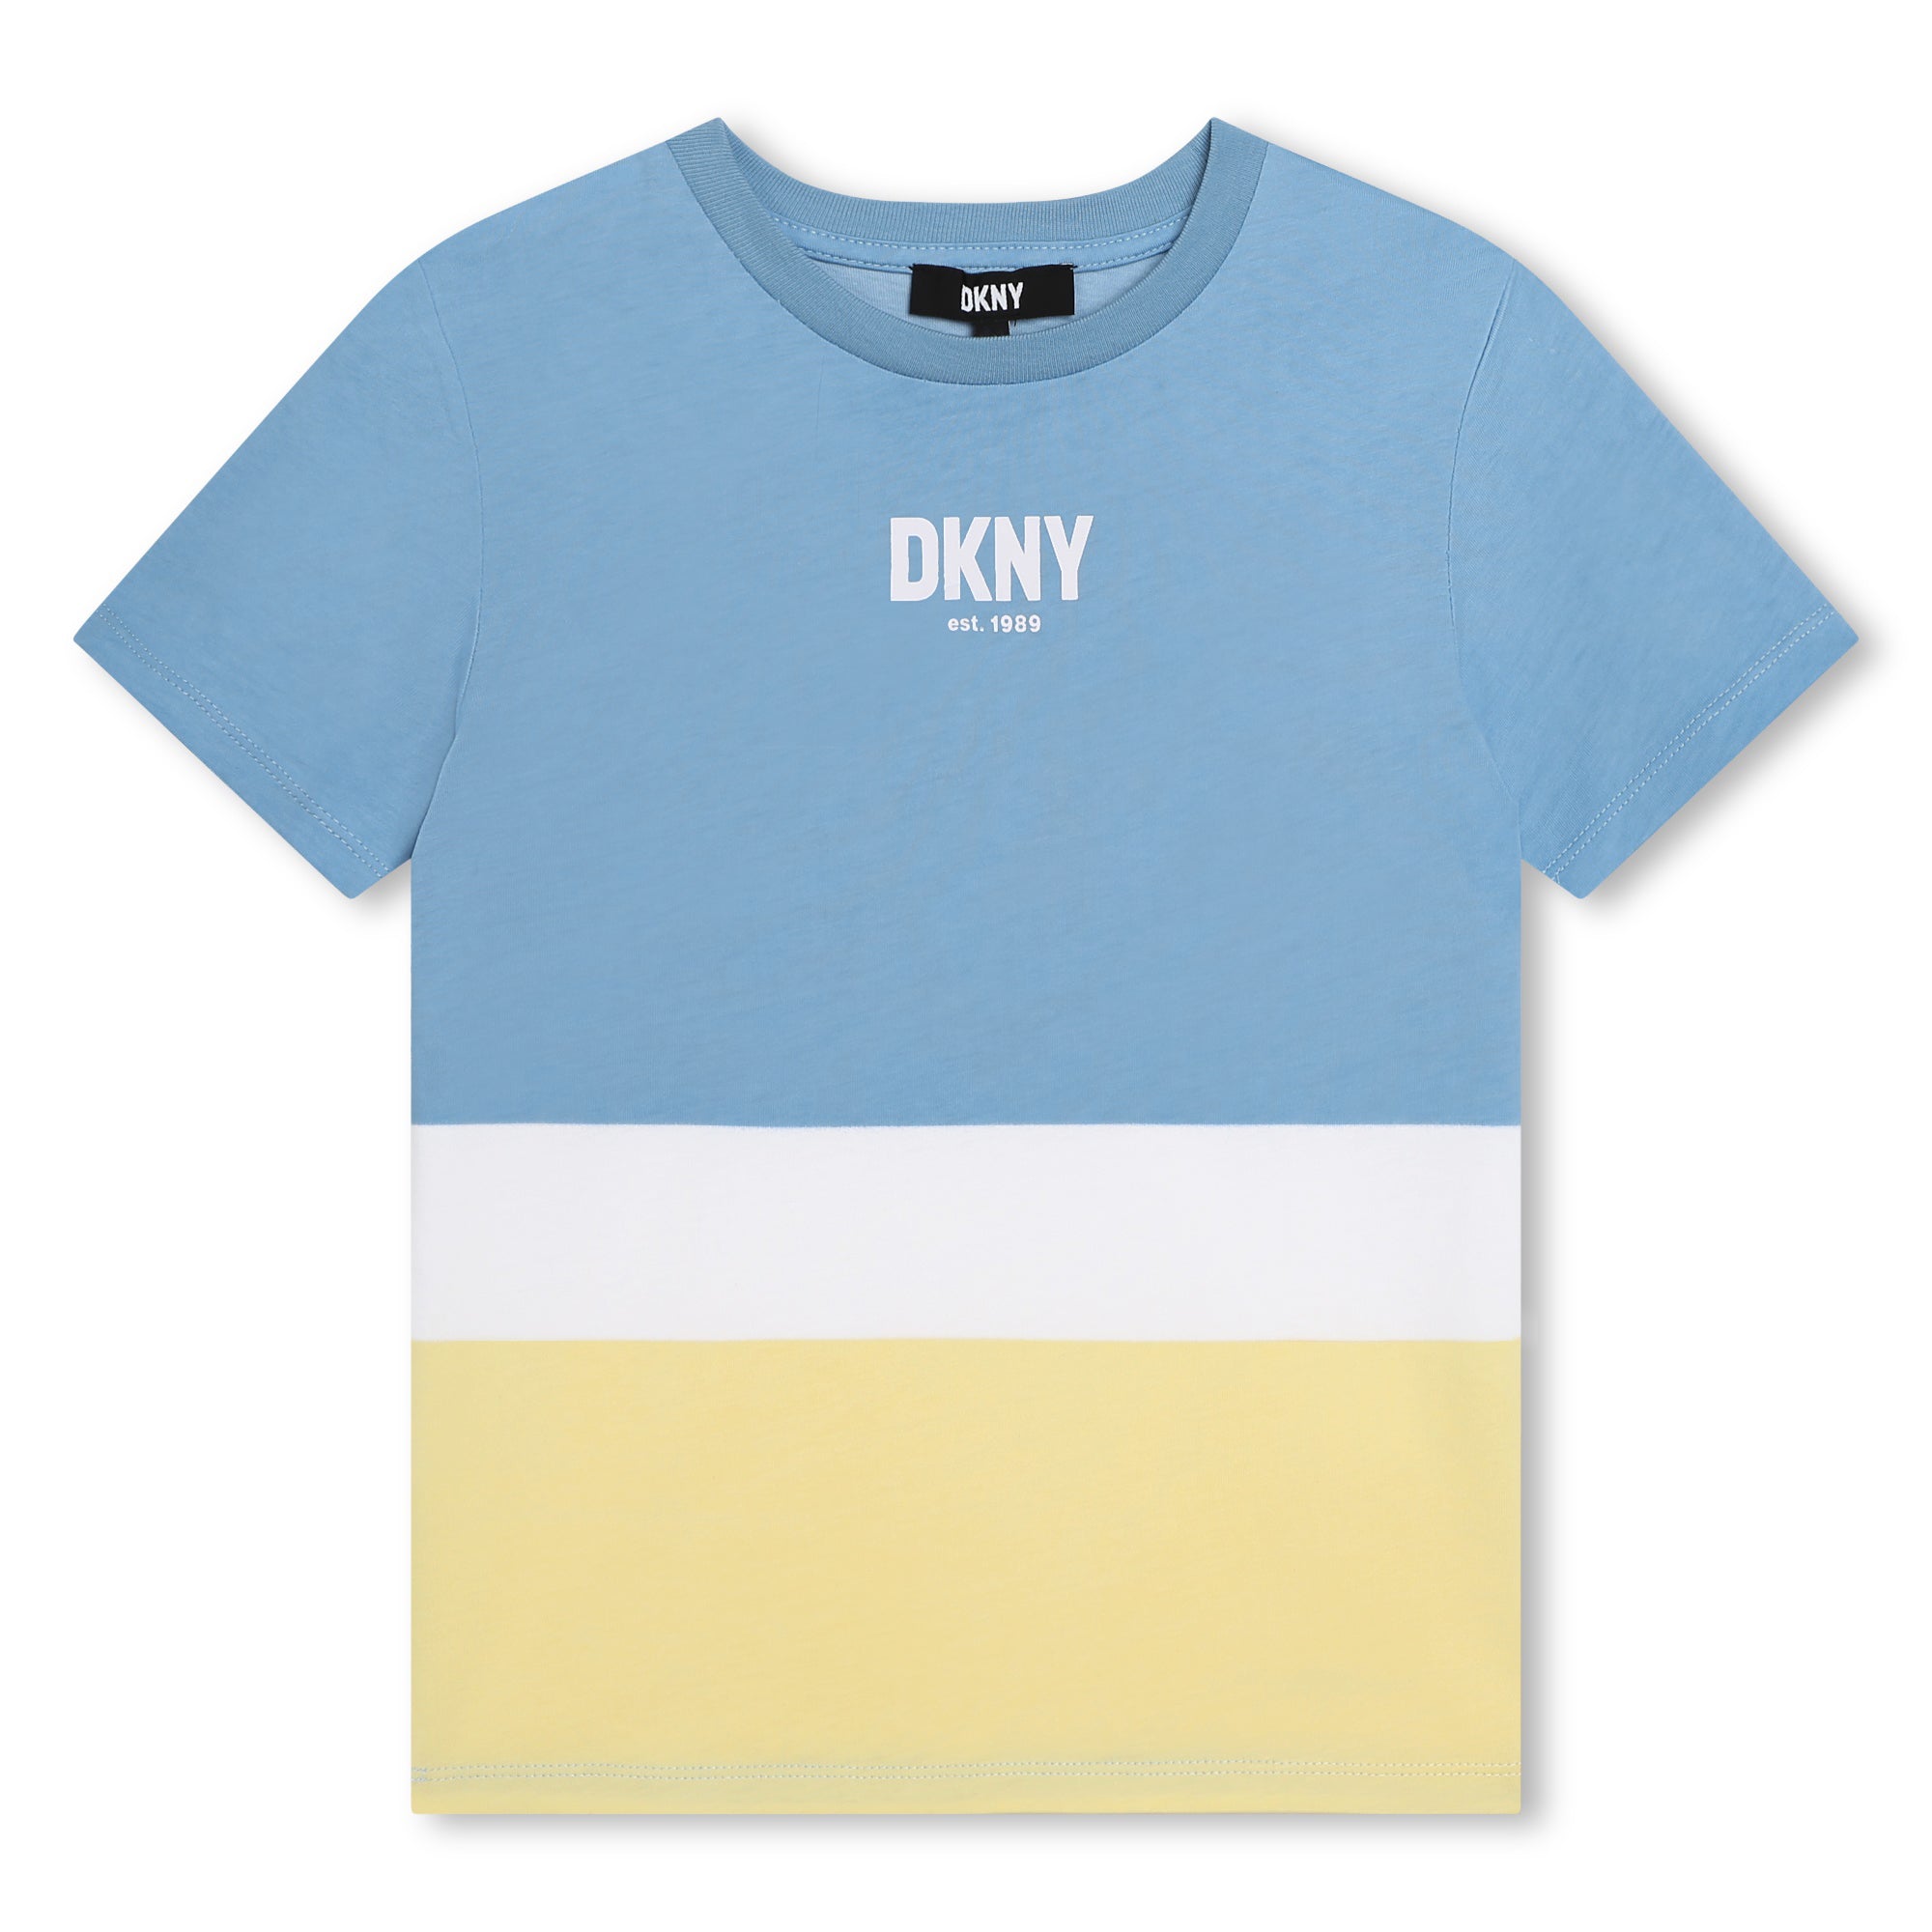 DKNY Pale Blue and Yellow Logo Tee Shirt